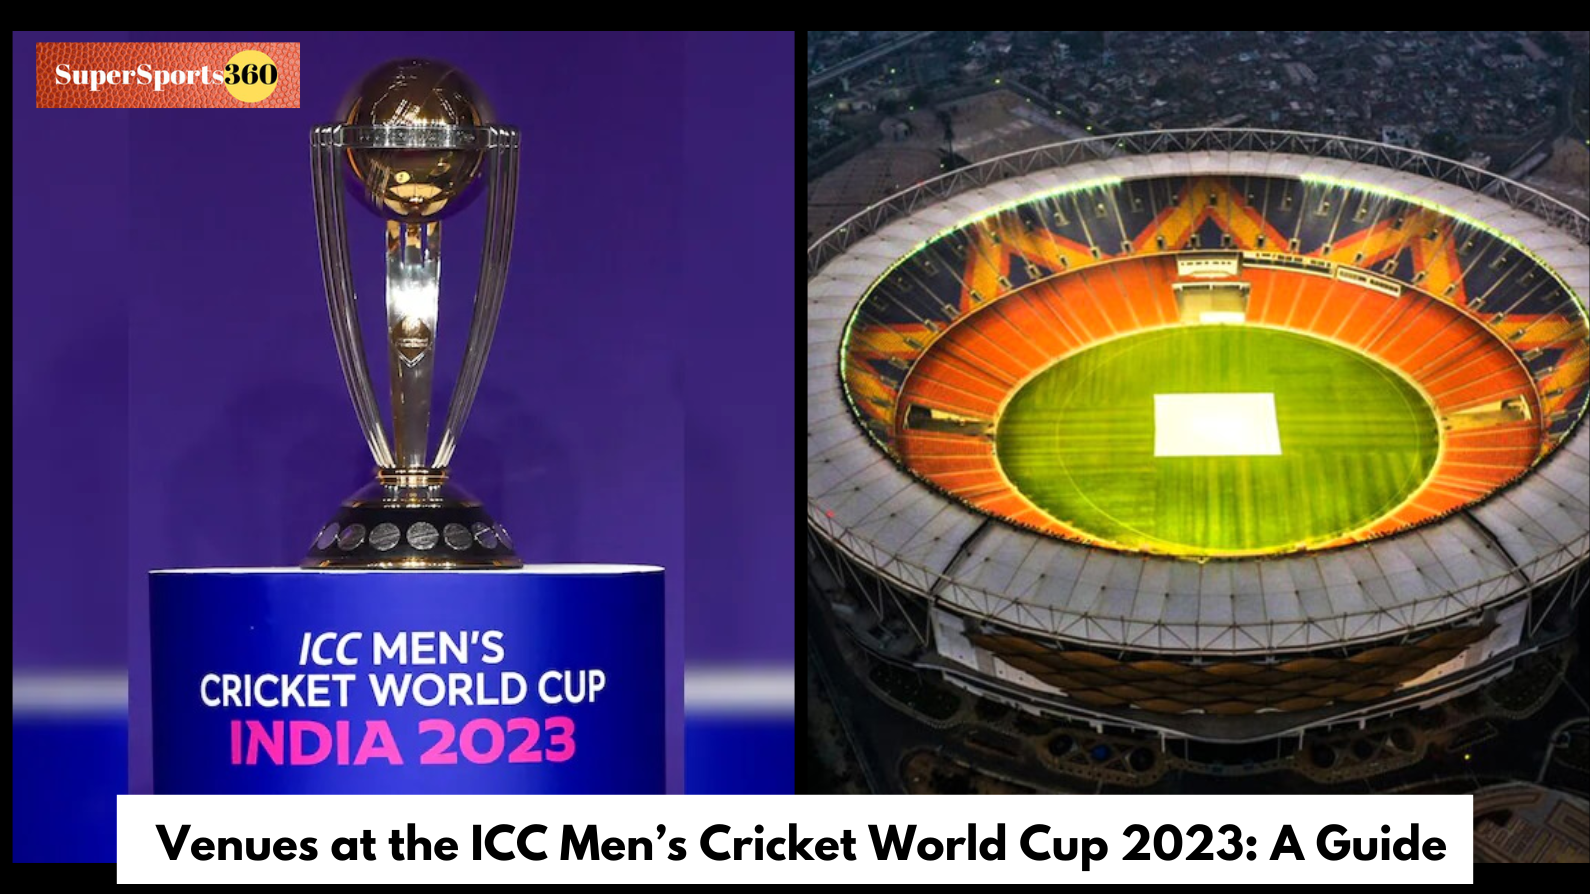 Venues at the ICC Men’s Cricket World Cup 2023: A Guide